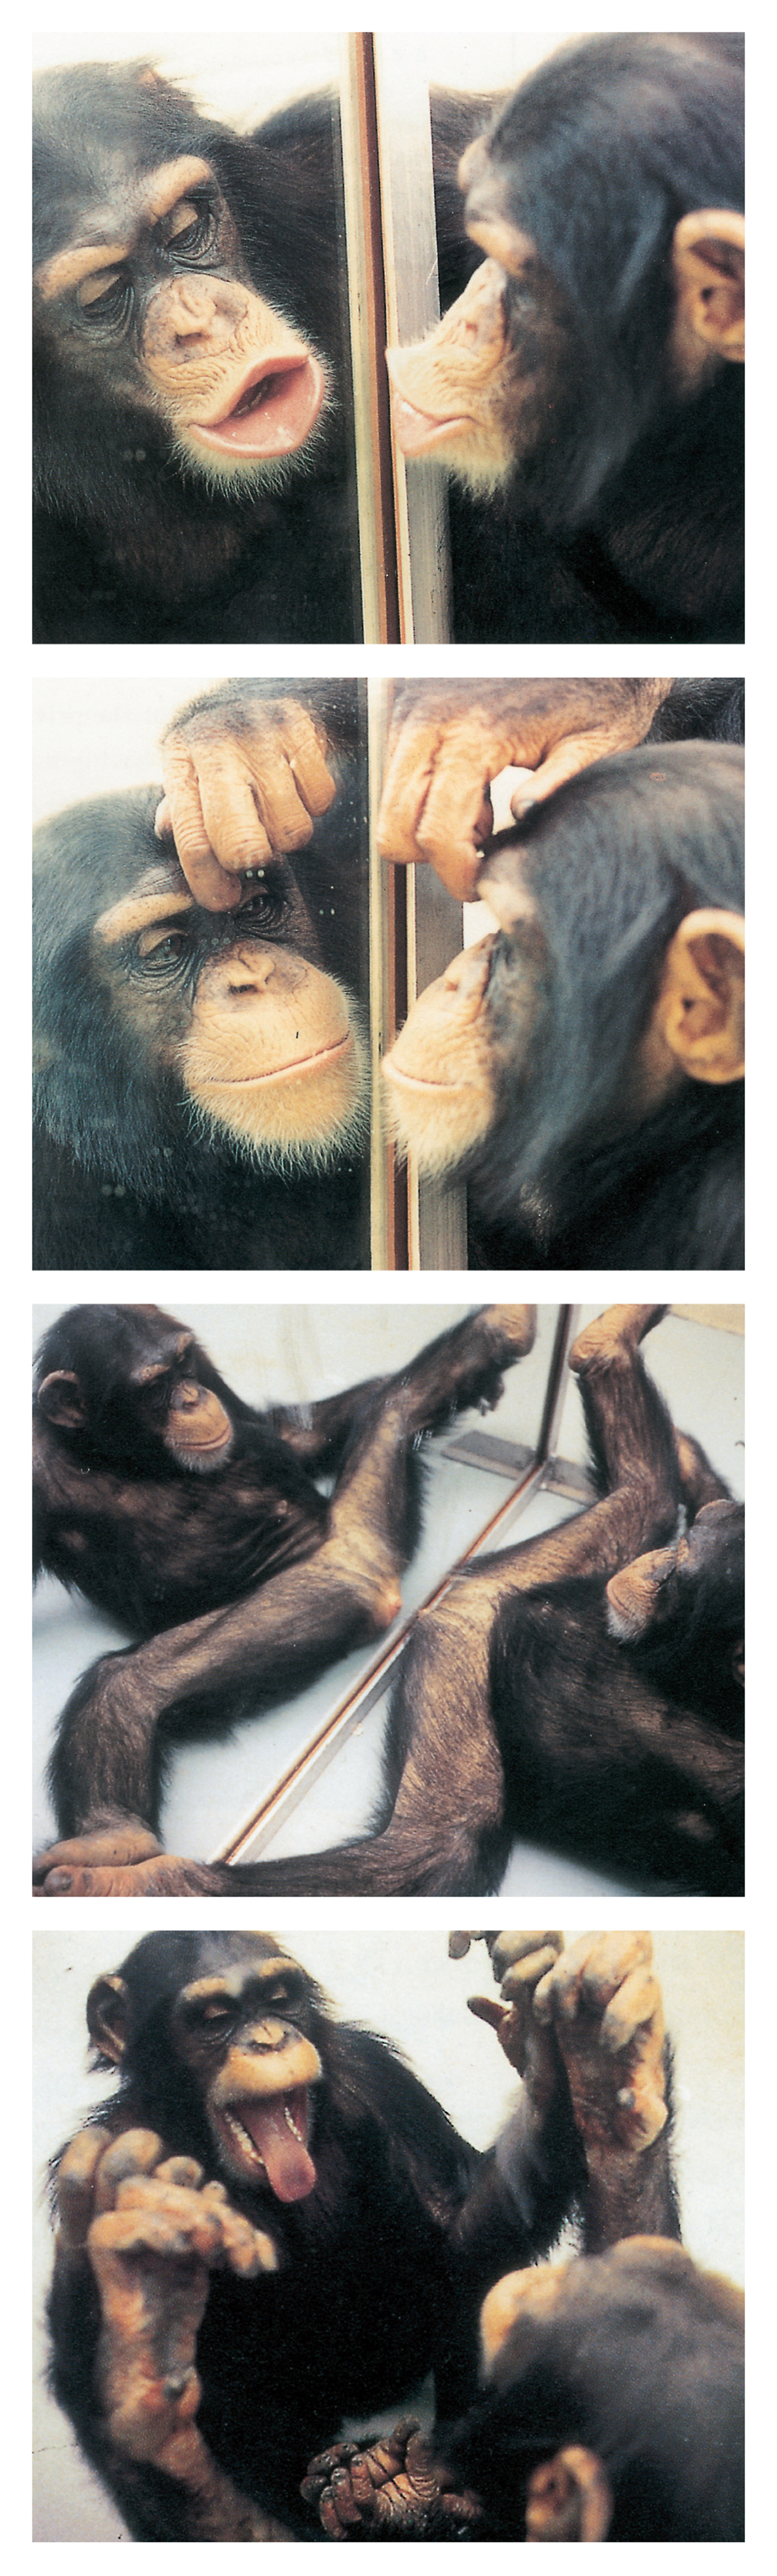 Four photos of a chimpanzee making faces at itself in a mirror in a 1970 experiment by psychologist Gordon Gallup at the State University of New York, Albany.